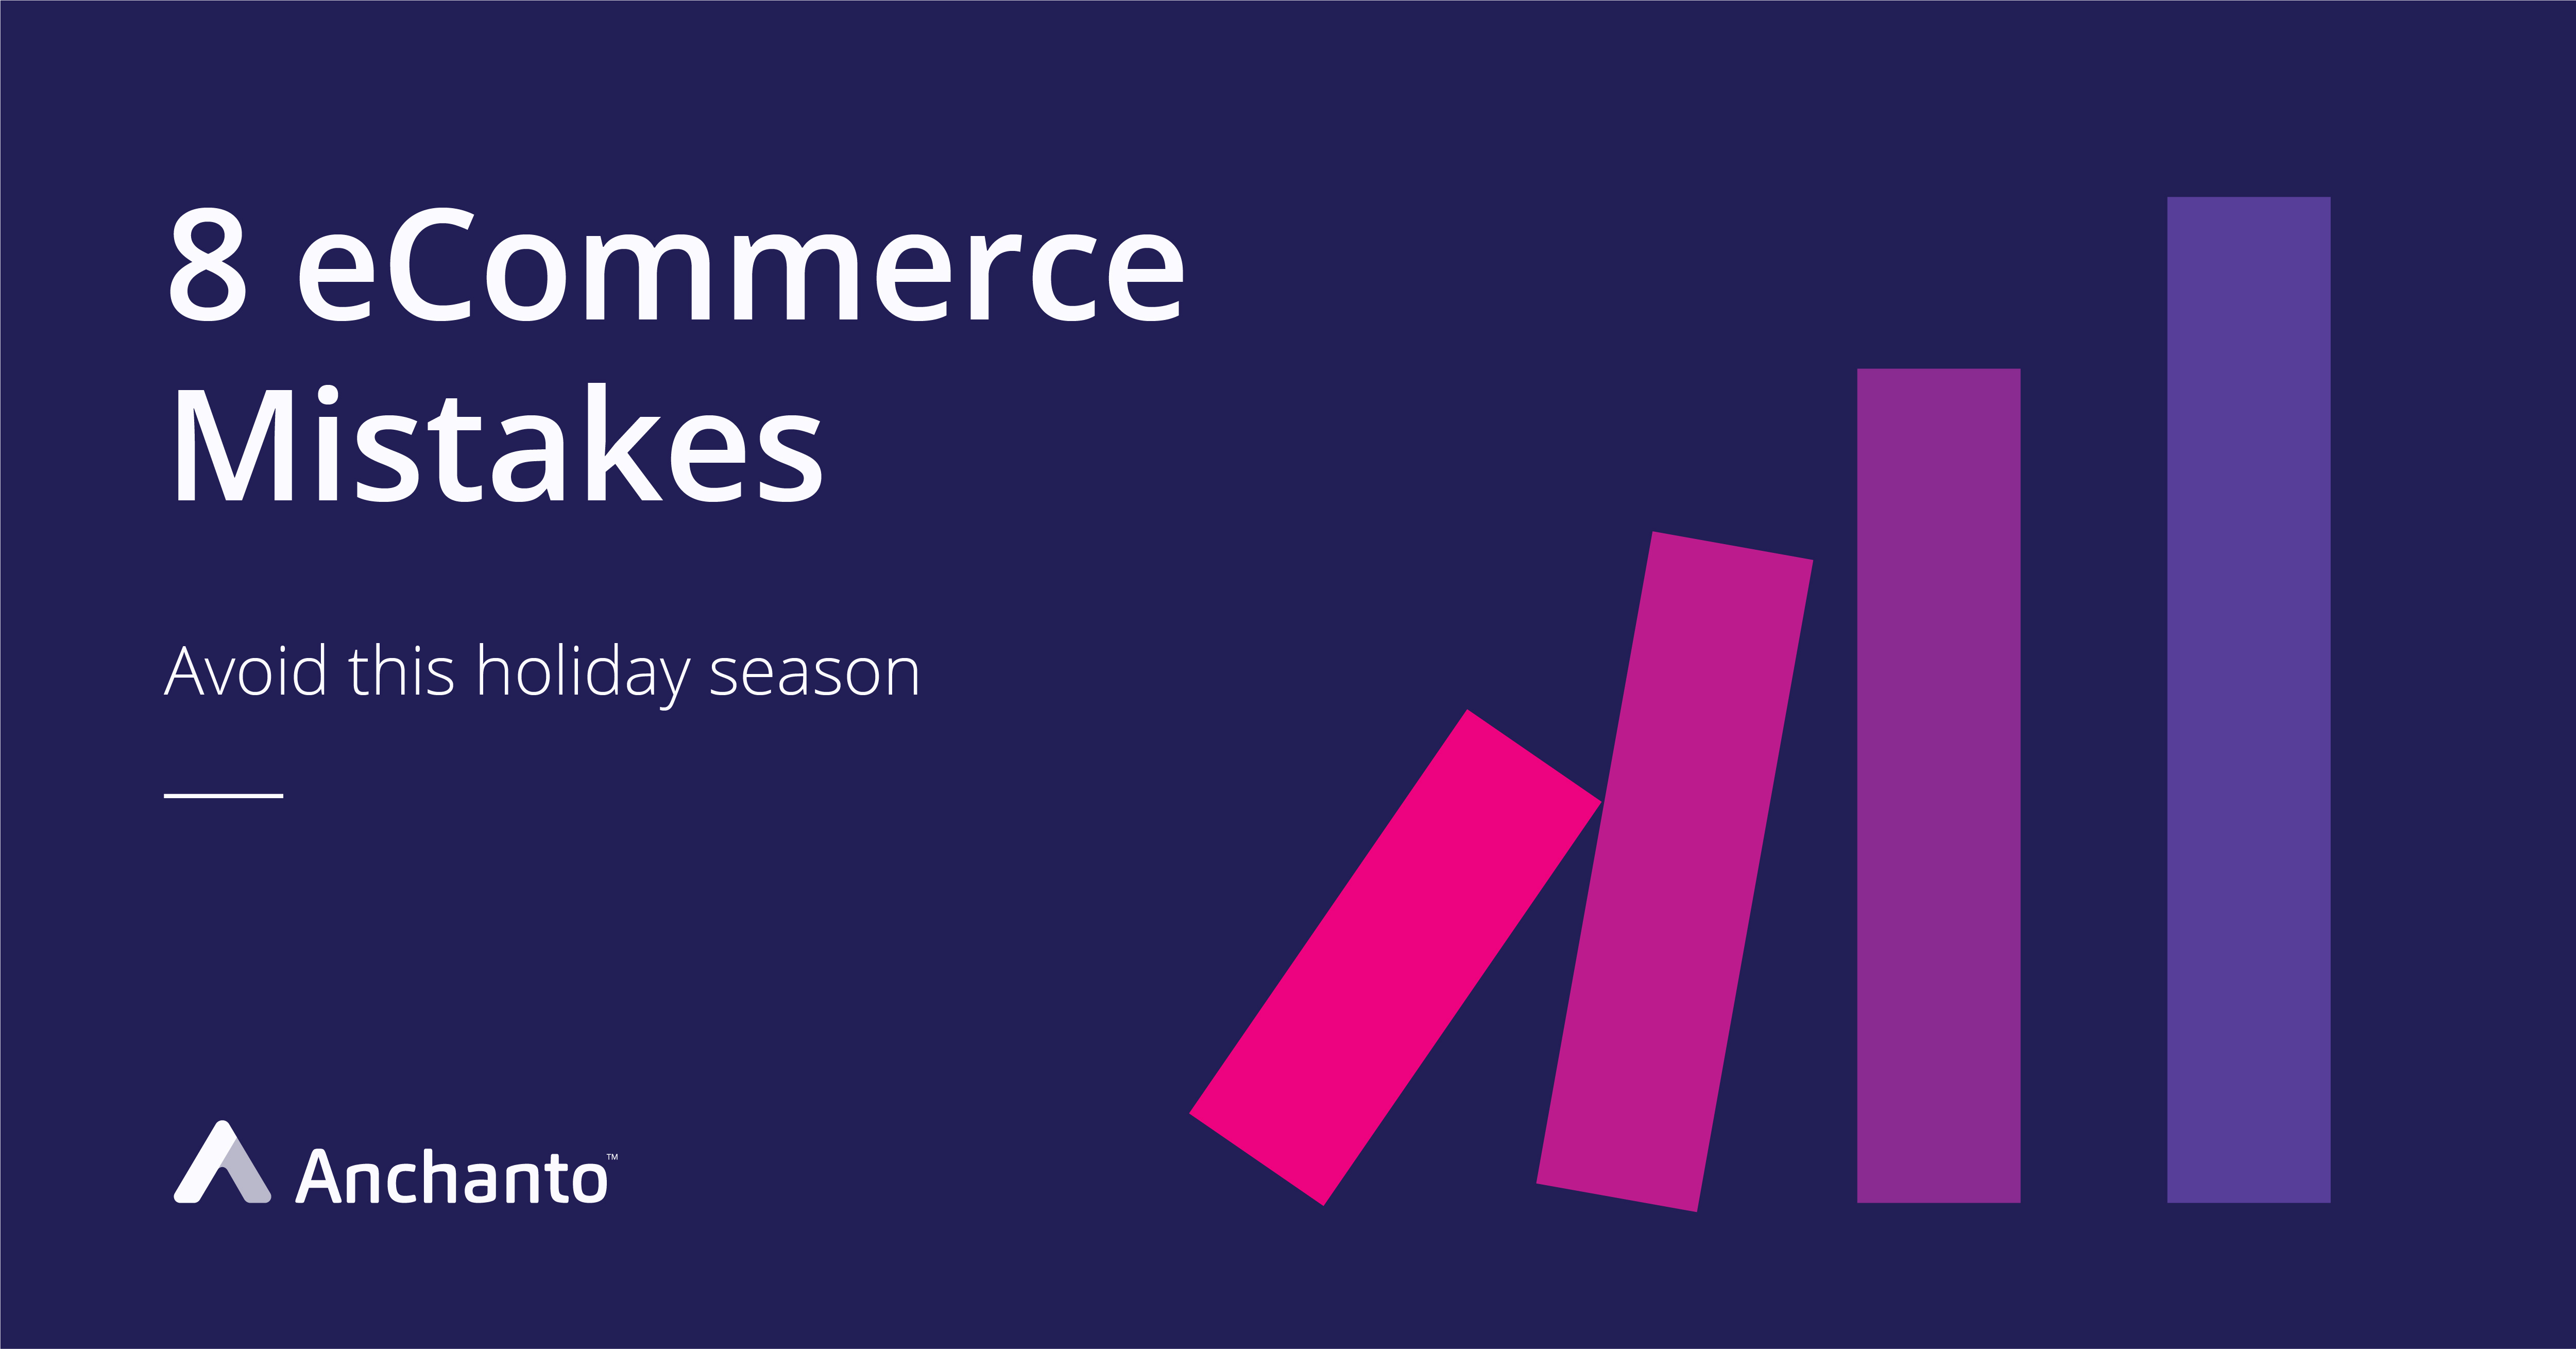 eCommerce mistakes to avoid